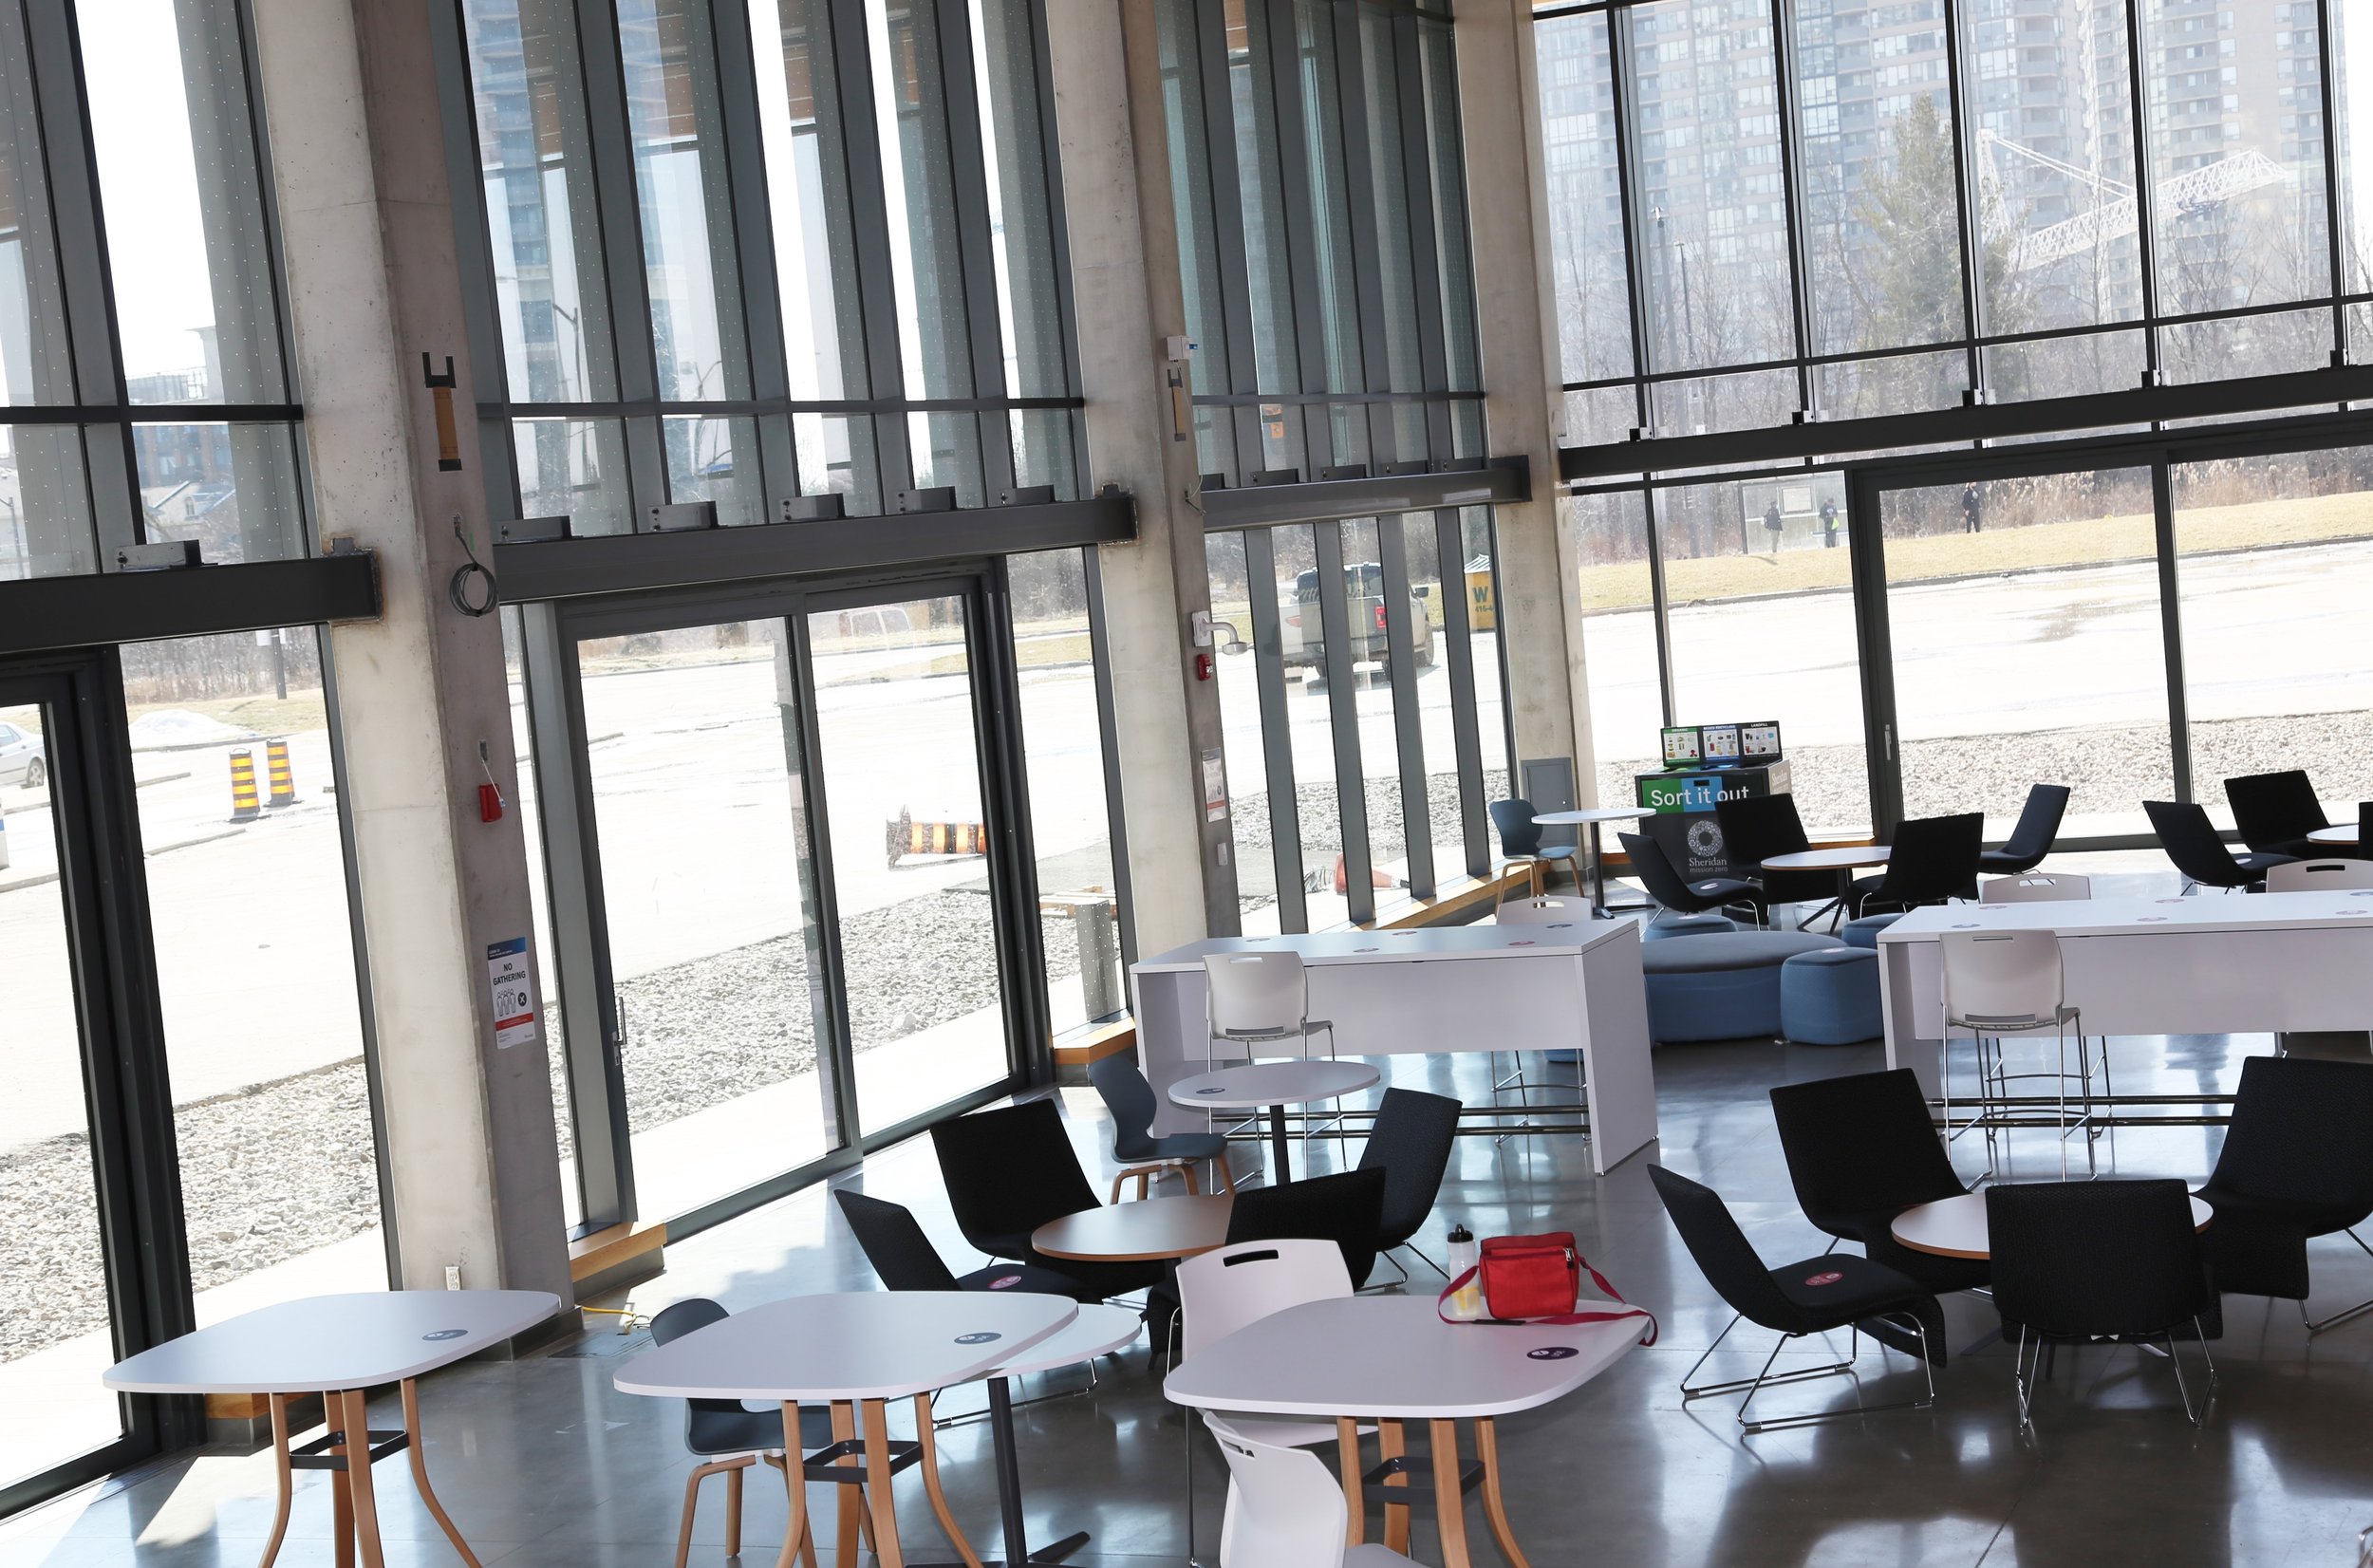  A side view of inside the Sheridan College Mississauga campus Student Centre atrium with desks, chairs and high ceiling glass windows.  